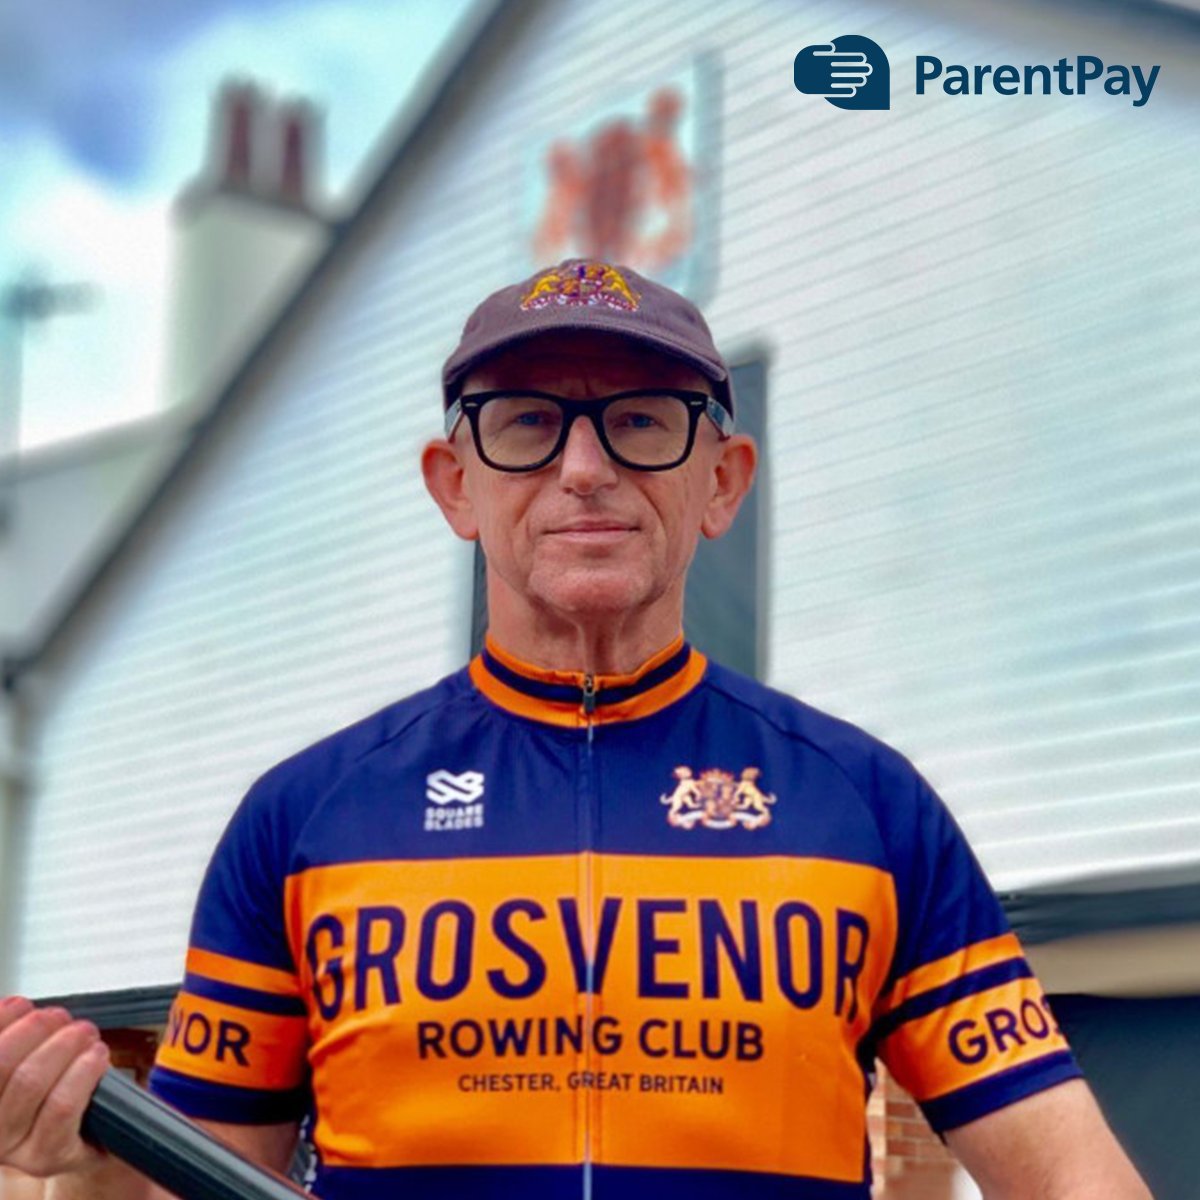 It's been an honour for us to support @BernieHollywood's astounding solo mission.

With his finishing date set for 1st April, we wanted to share how his @BoatofHope campaign supports children's #mentalhealth and how you can donate to this cause.👇
bit.ly/3K9L2oy